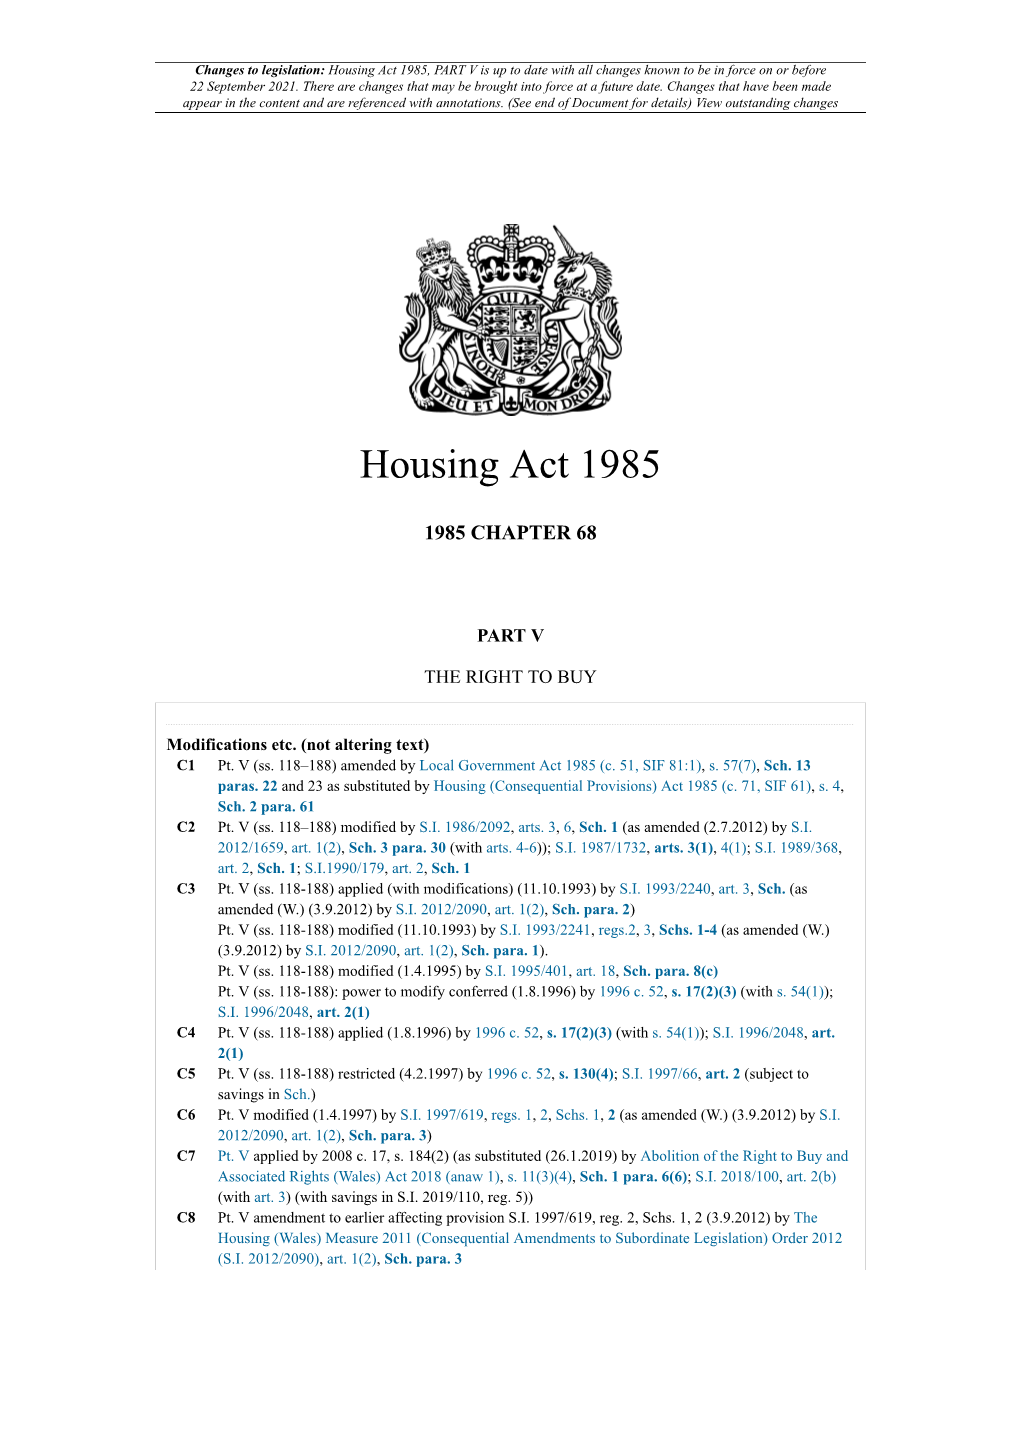 Housing Act 1985, PART V Is up to Date with All Changes Known to Be in Force on Or Before 22 September 2021